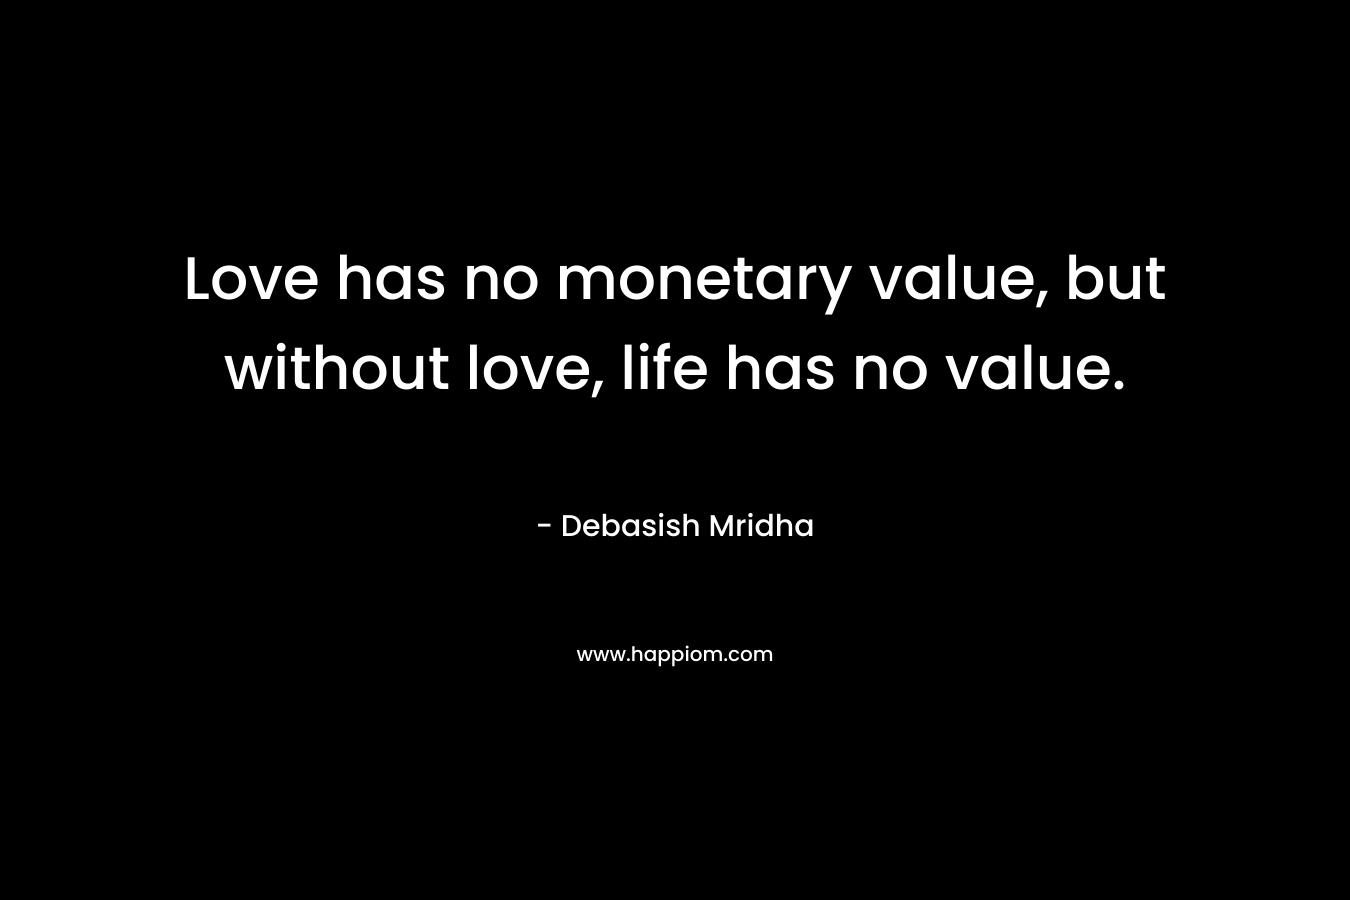 Love has no monetary value, but without love, life has no value.